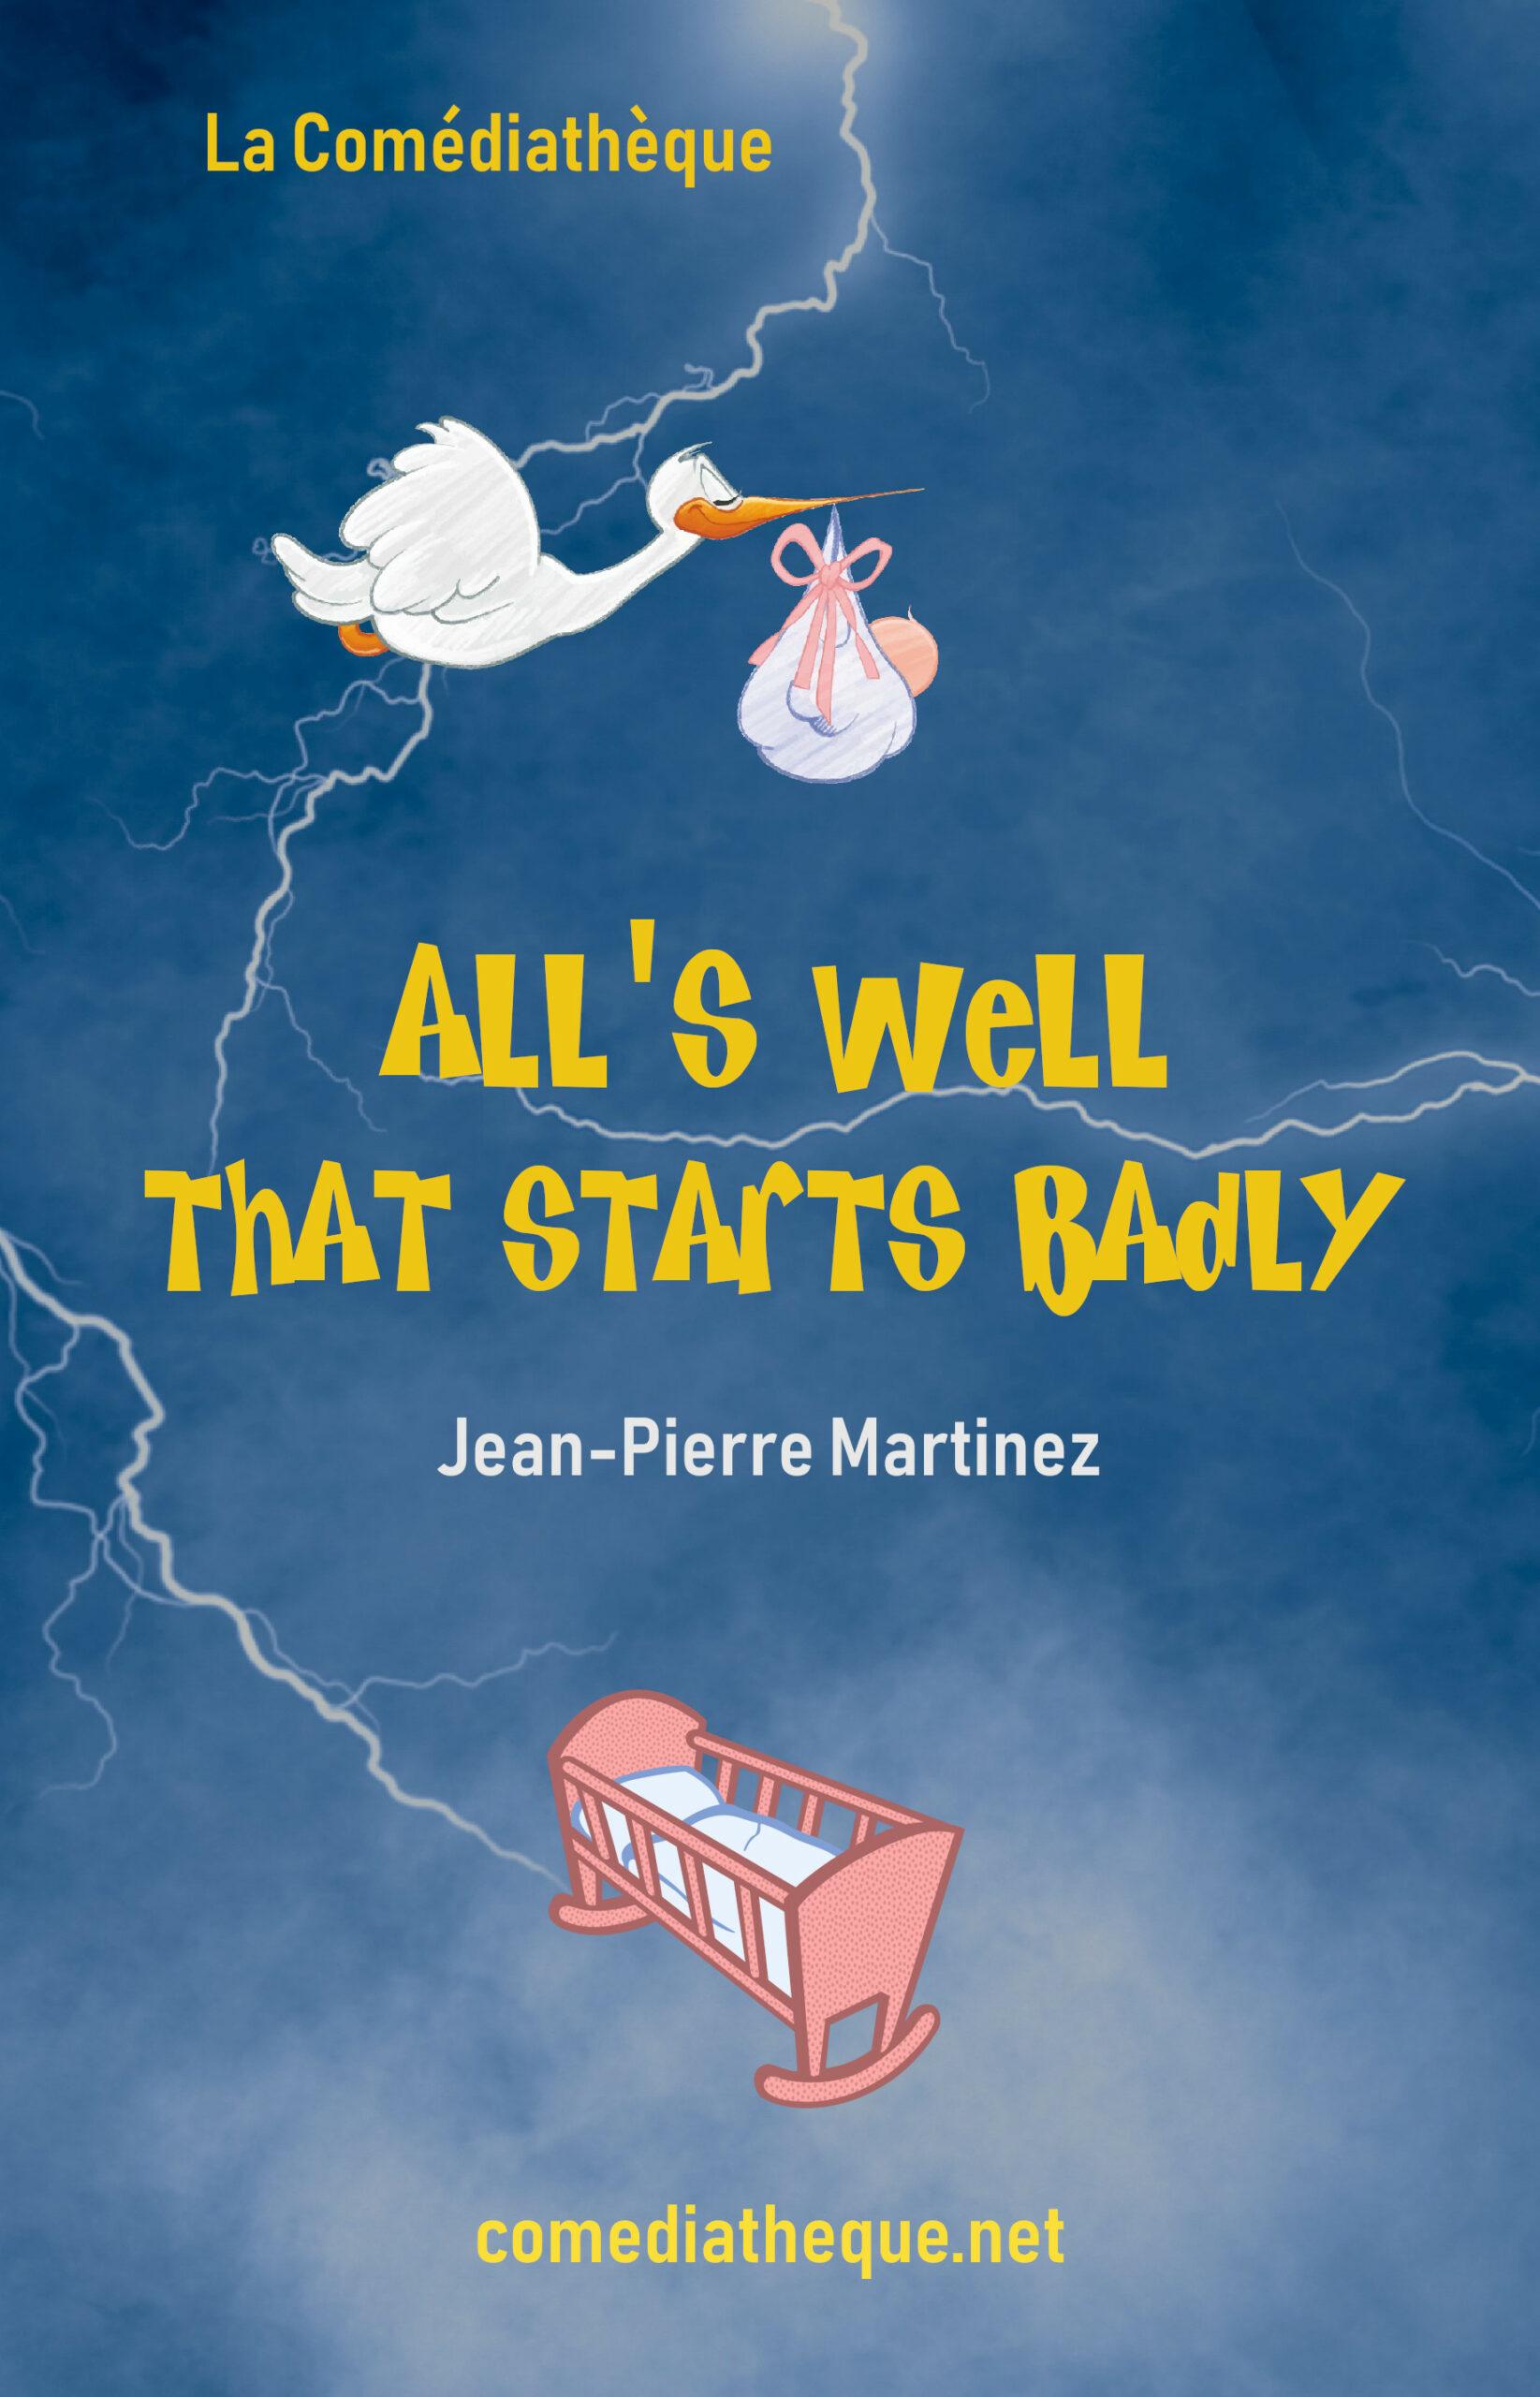 All is well that starts badly Jean-Pierre Martinez